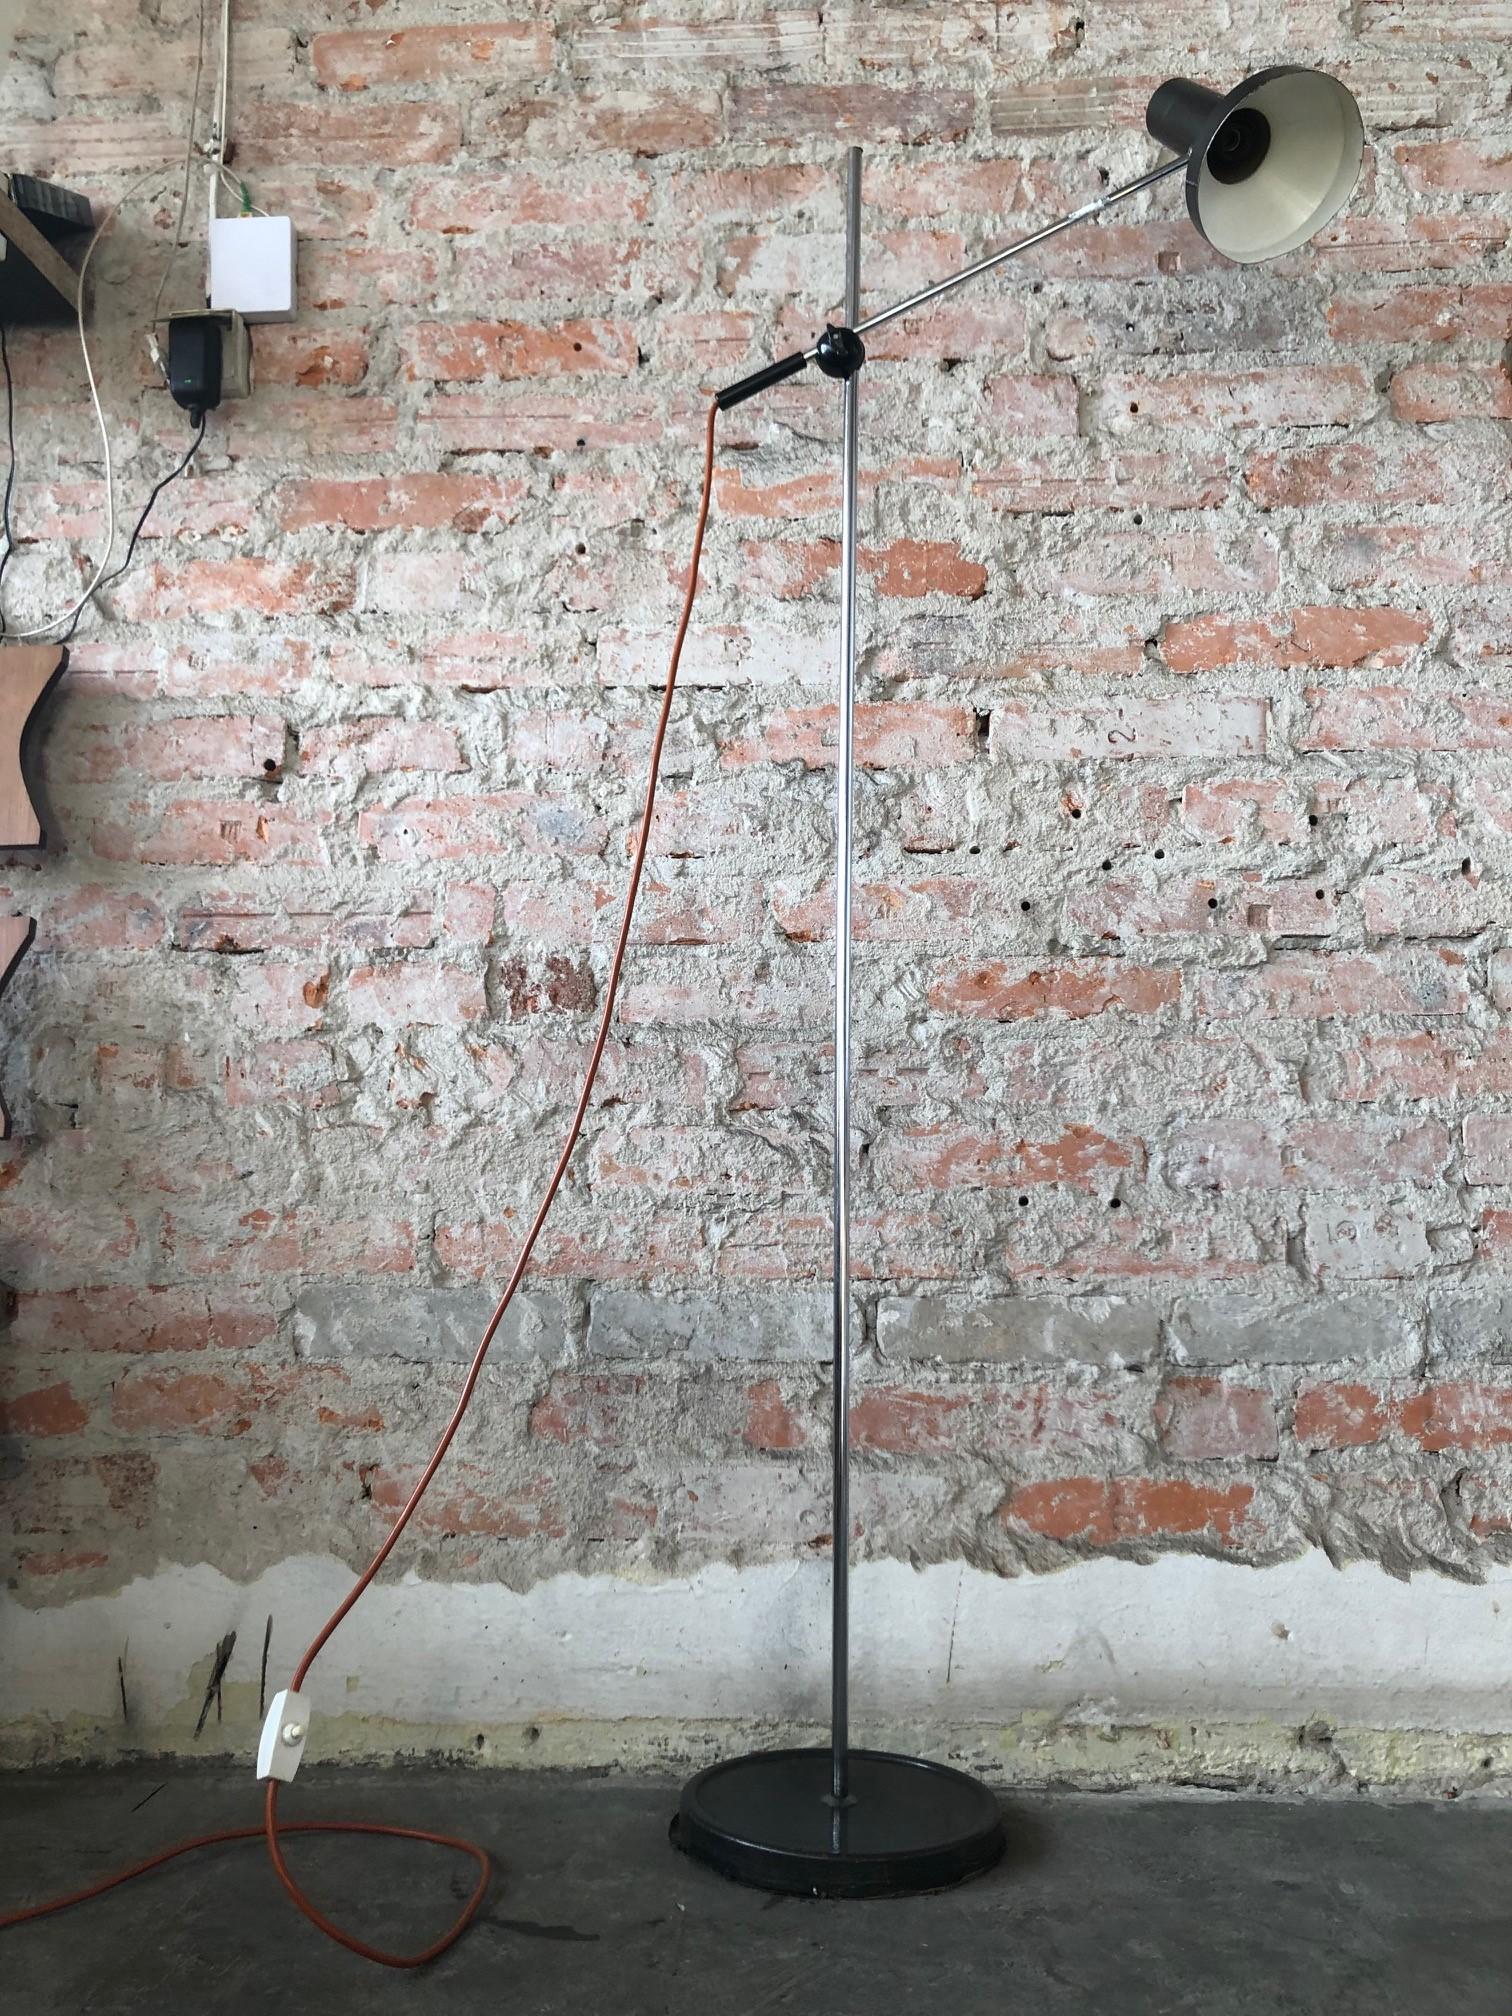 This floor lamp with adjustable height and angle was made during the 1960s. It is made of metal with black lacquer and chrome. The piece is fully functional and is in a good vintage condition.